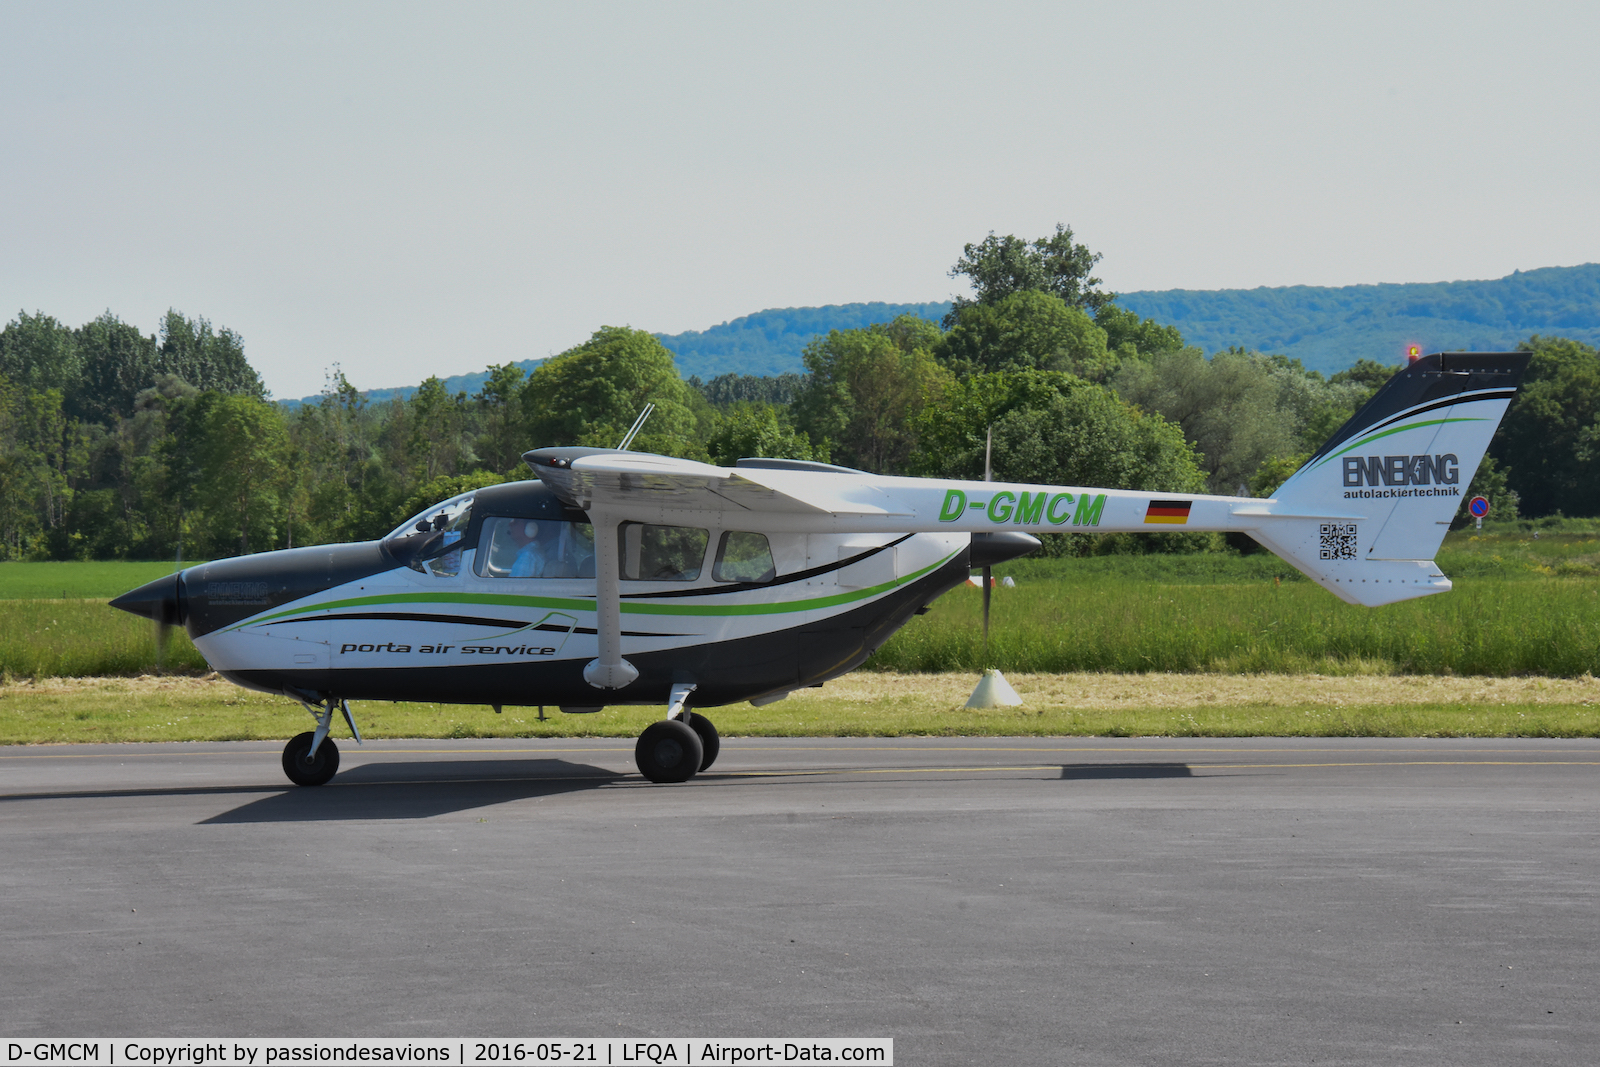 D-GMCM, 1972 Reims F337F Super Skymaster C/N F3370047, Just taxiing